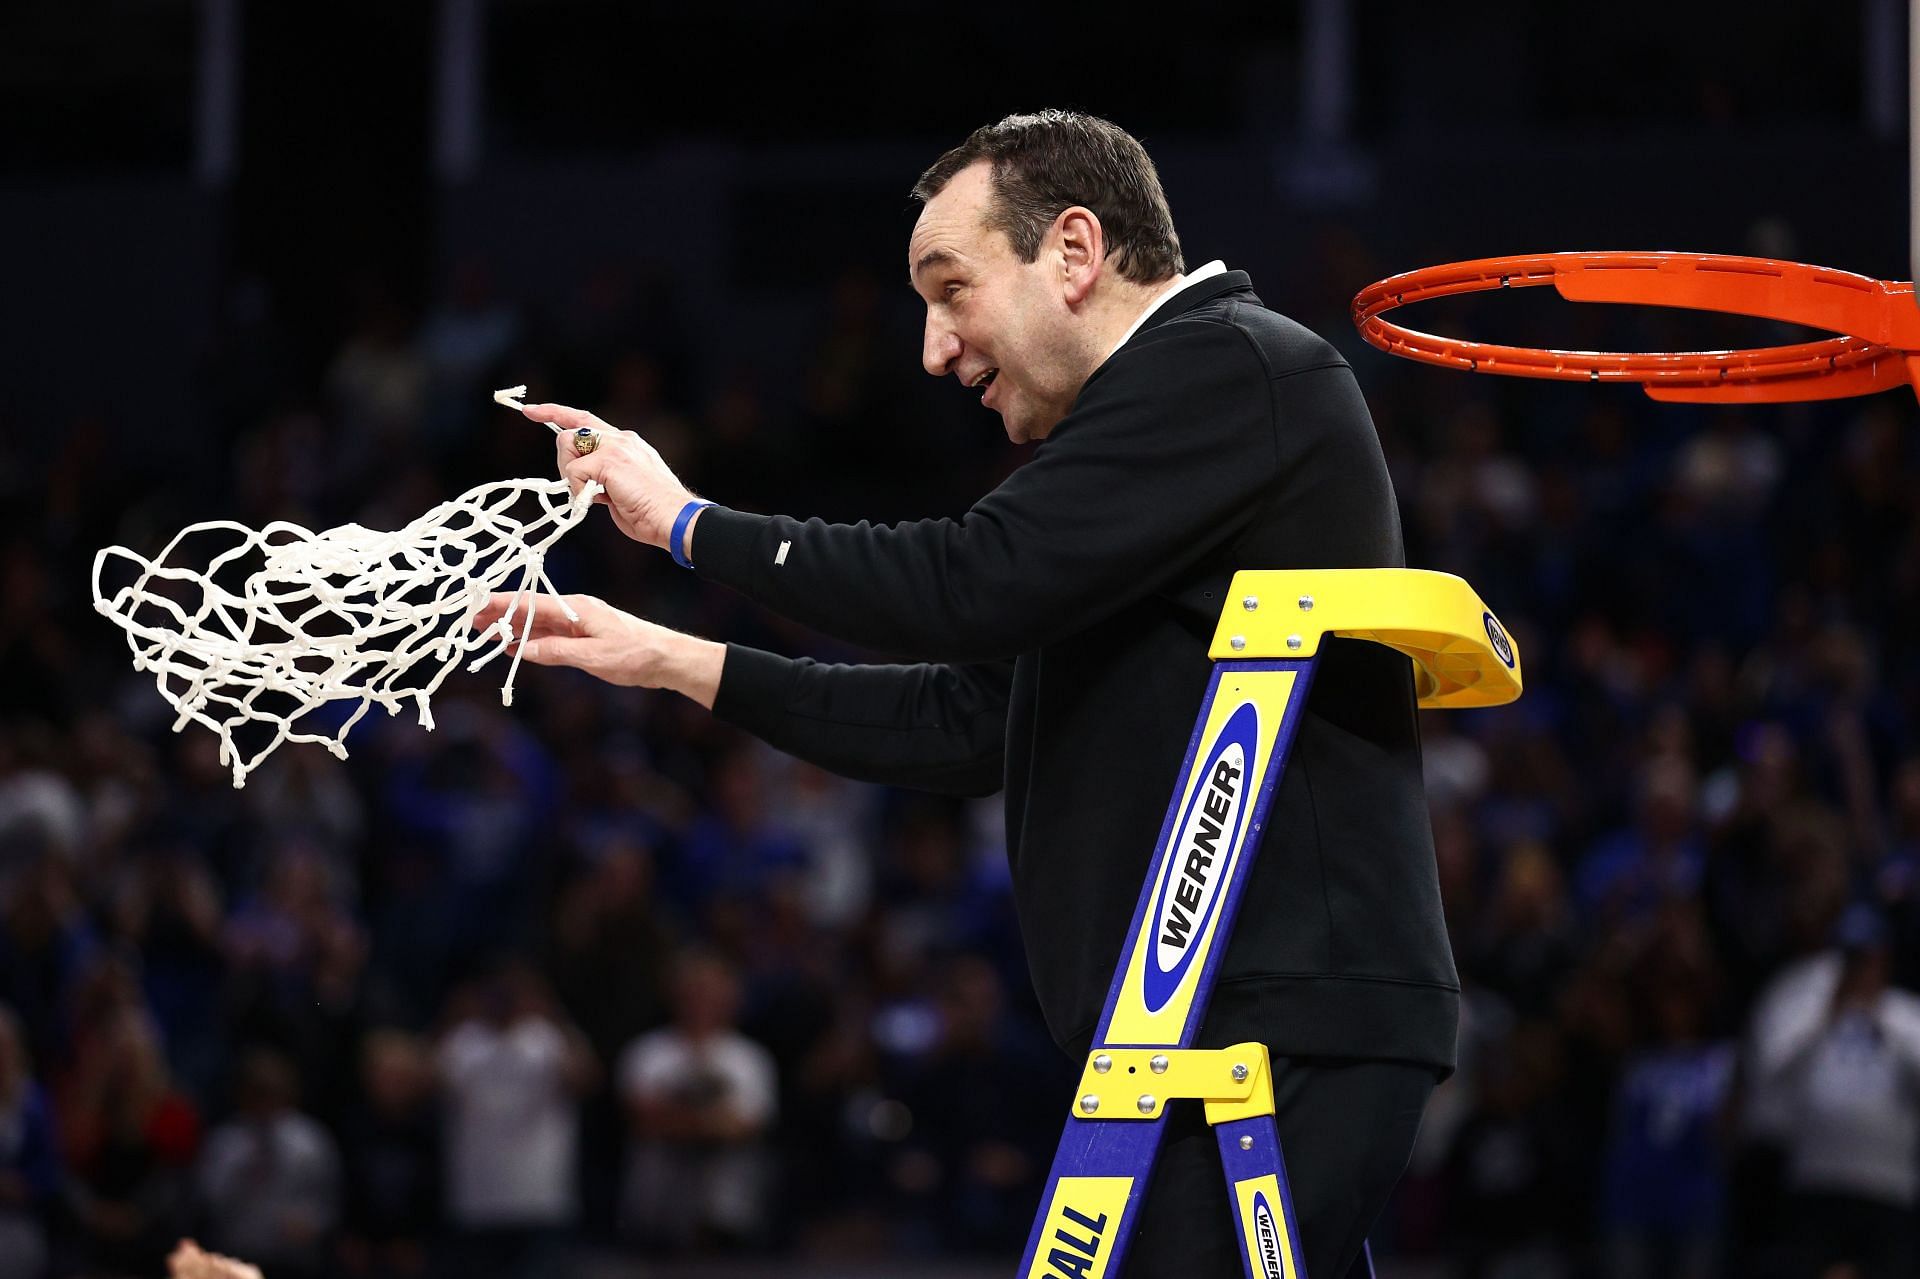 Mike Krzyzewski cut down the West region nets and aims to do the same in the national championship game.